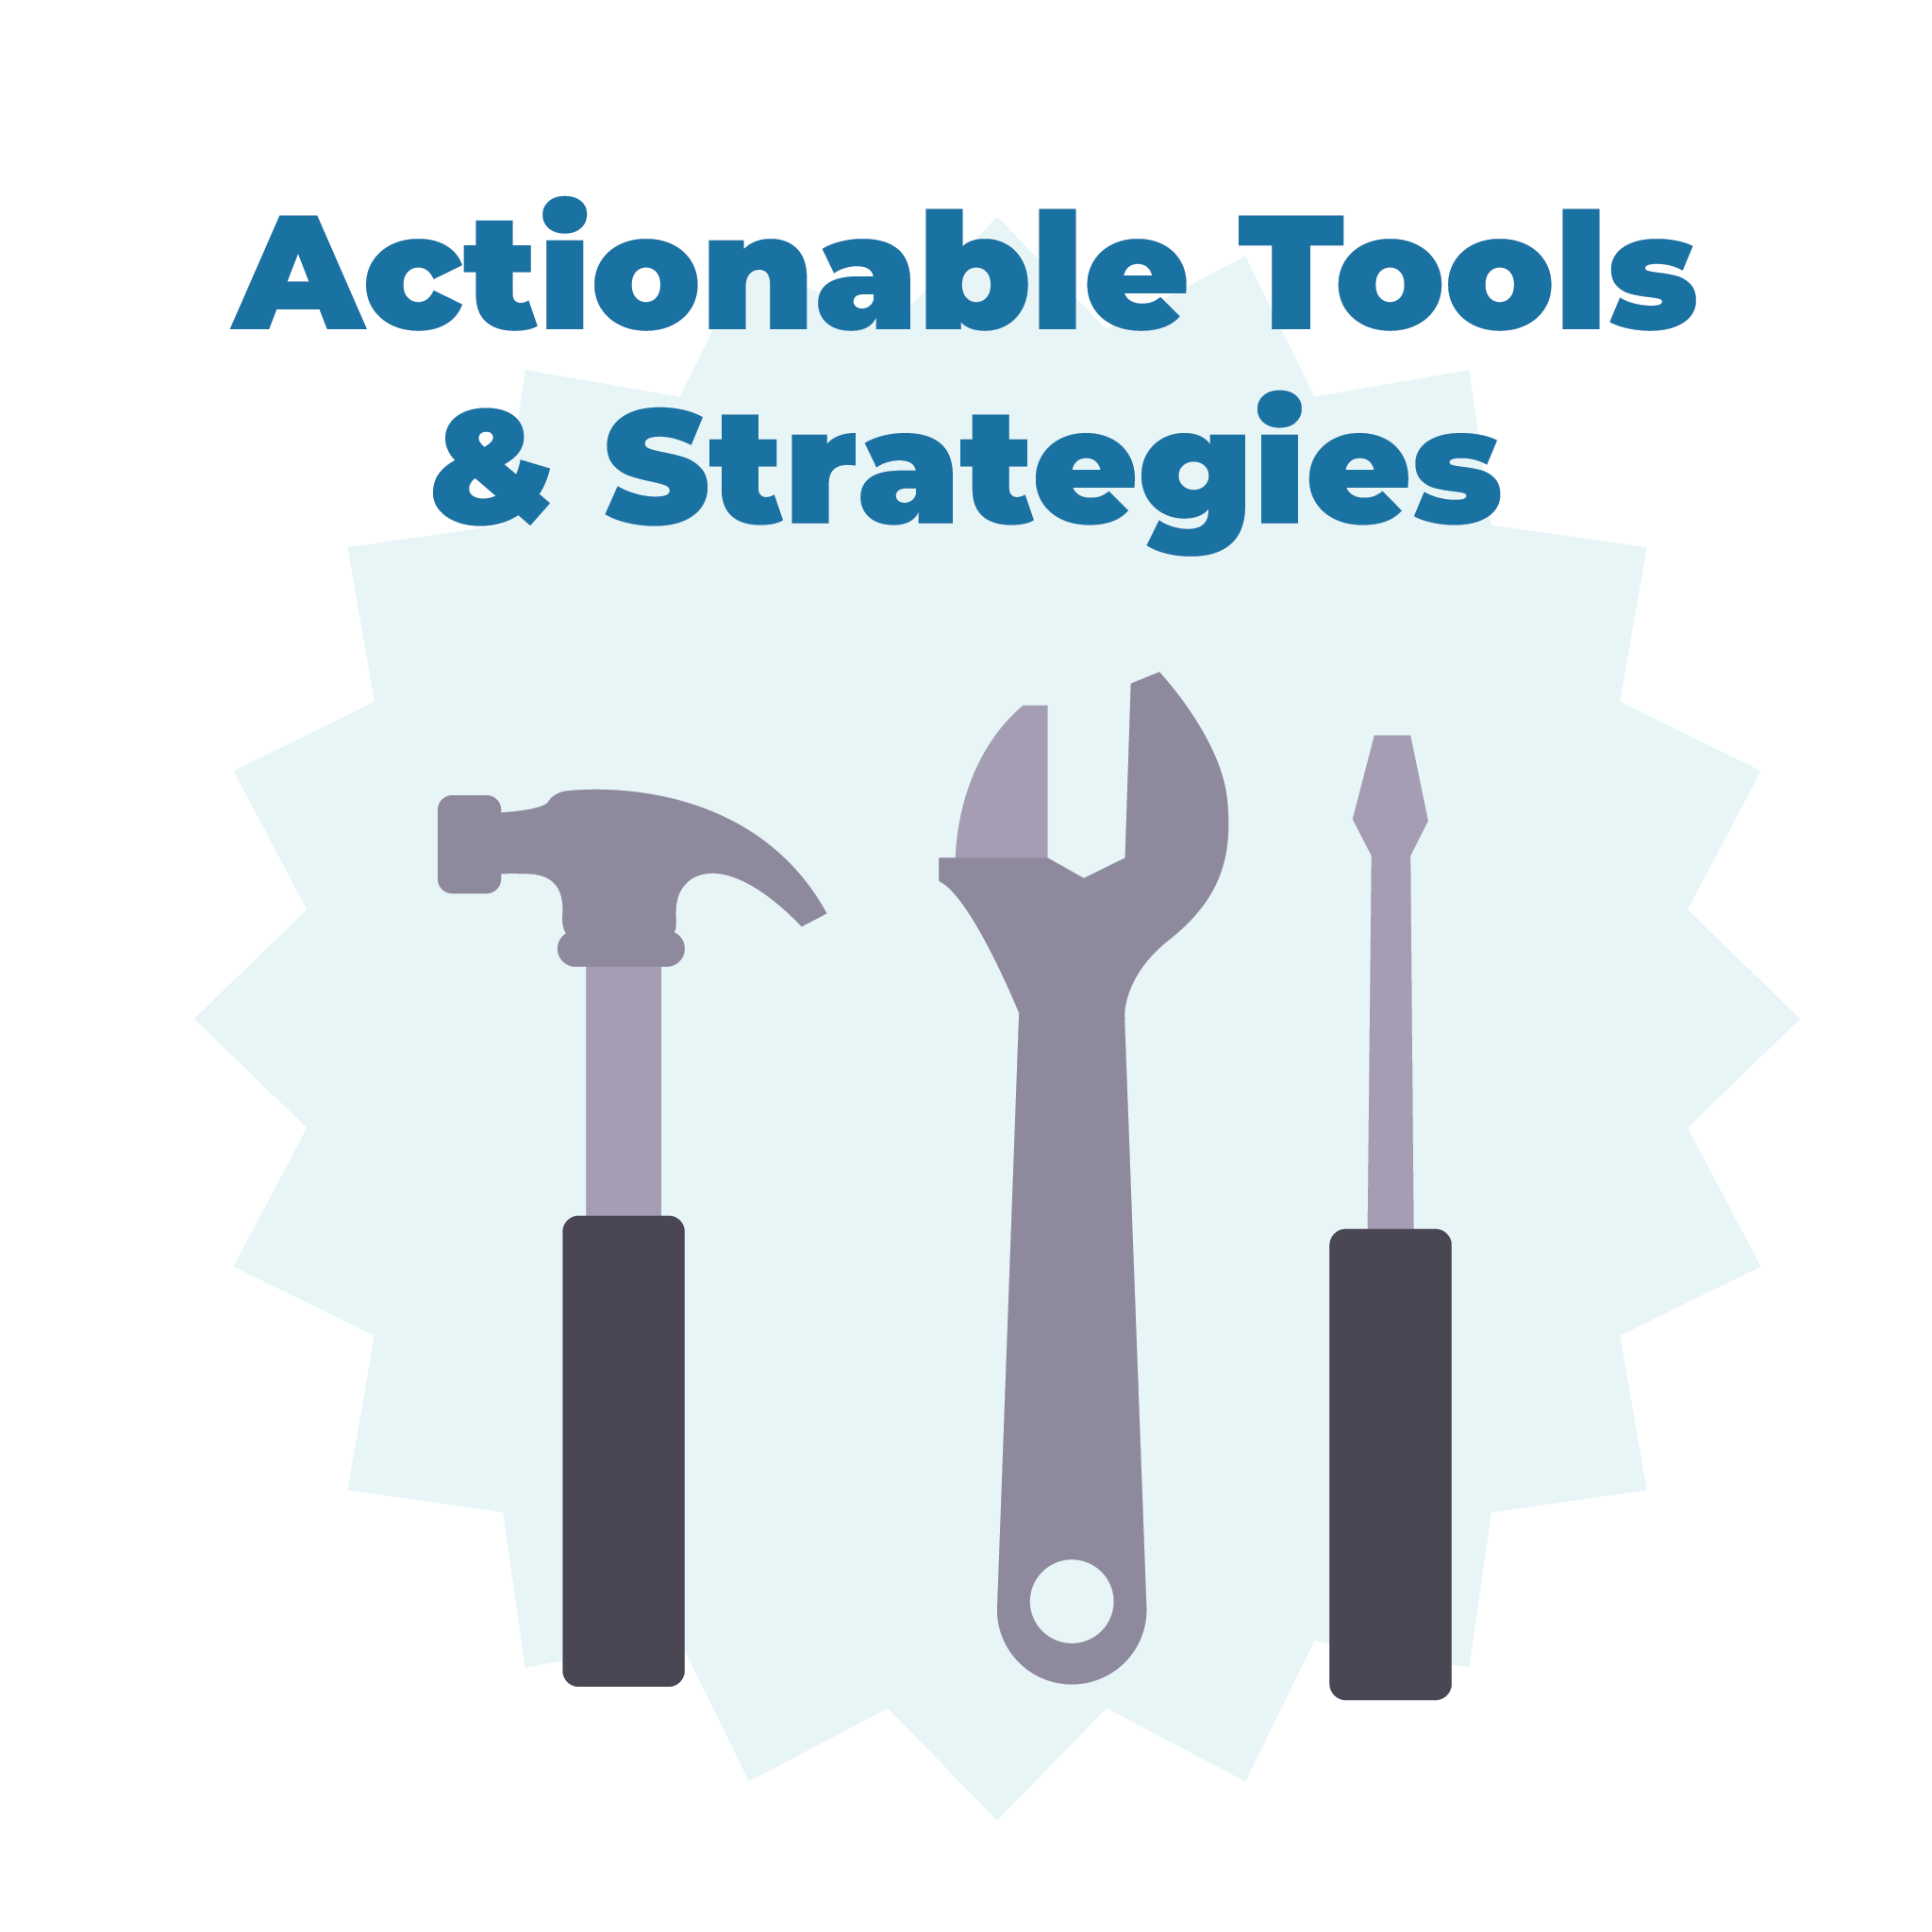 Actionable tools and strategies.